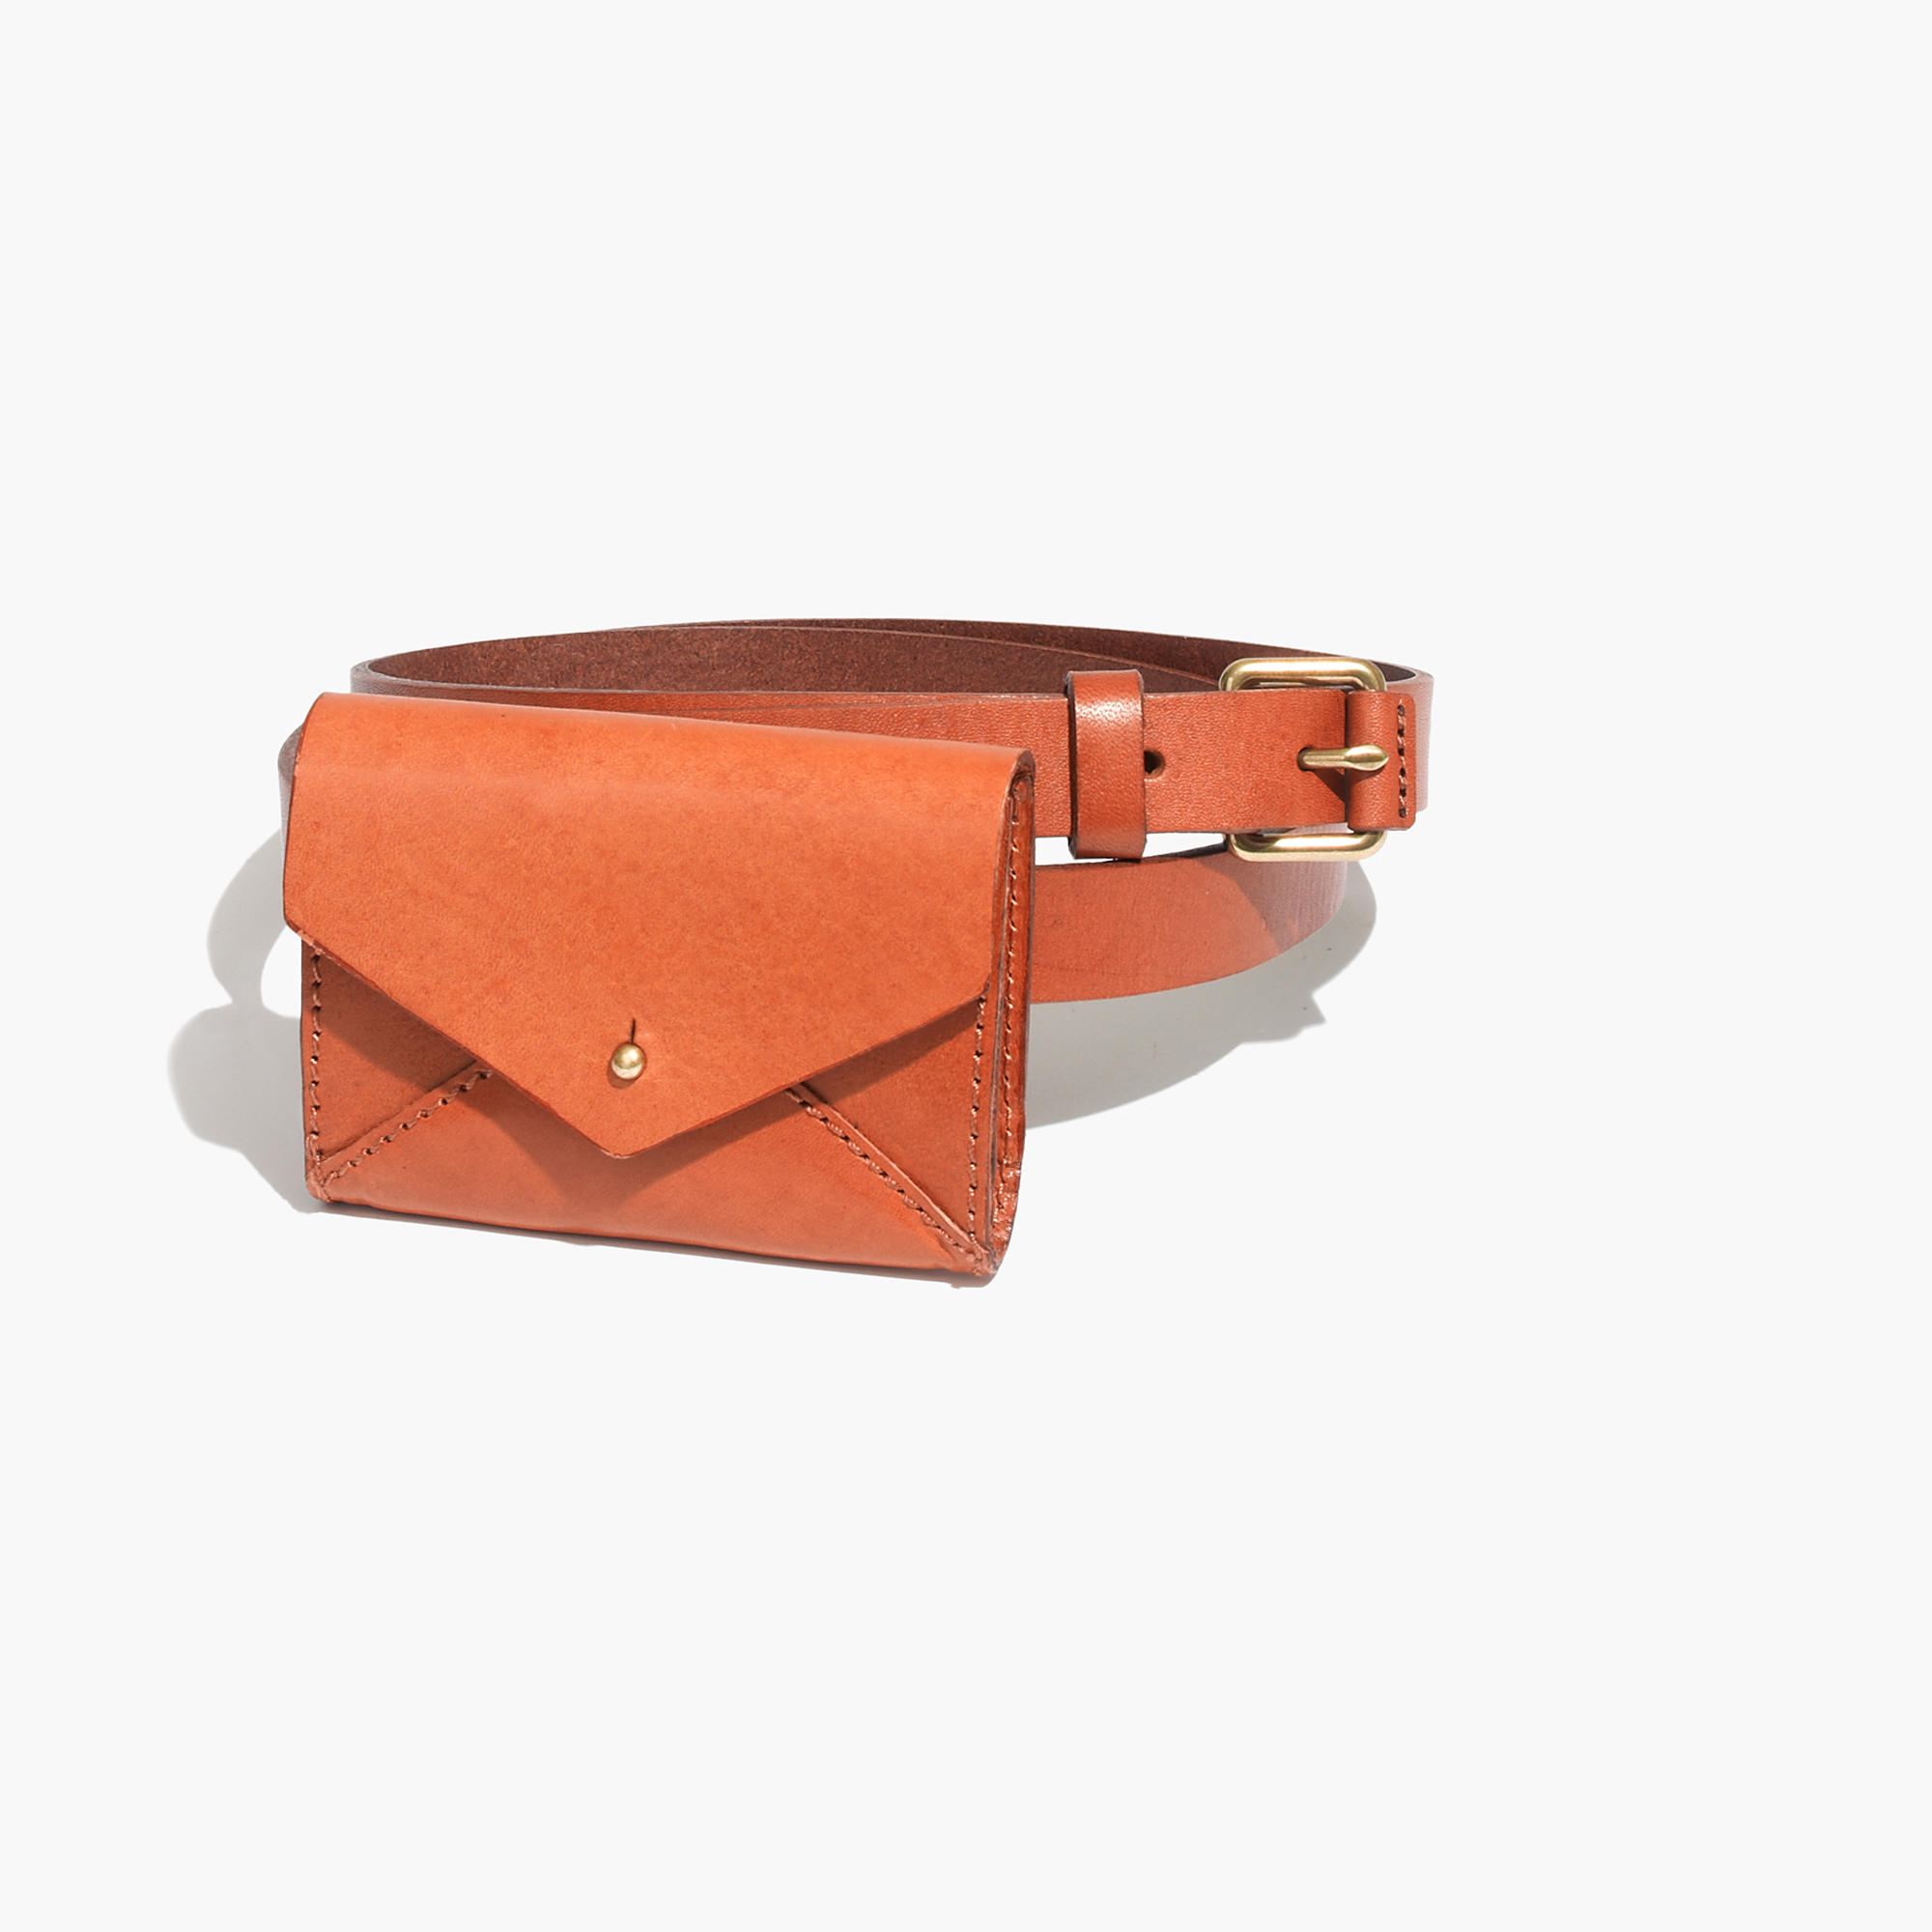 Madewell leather pouch belt